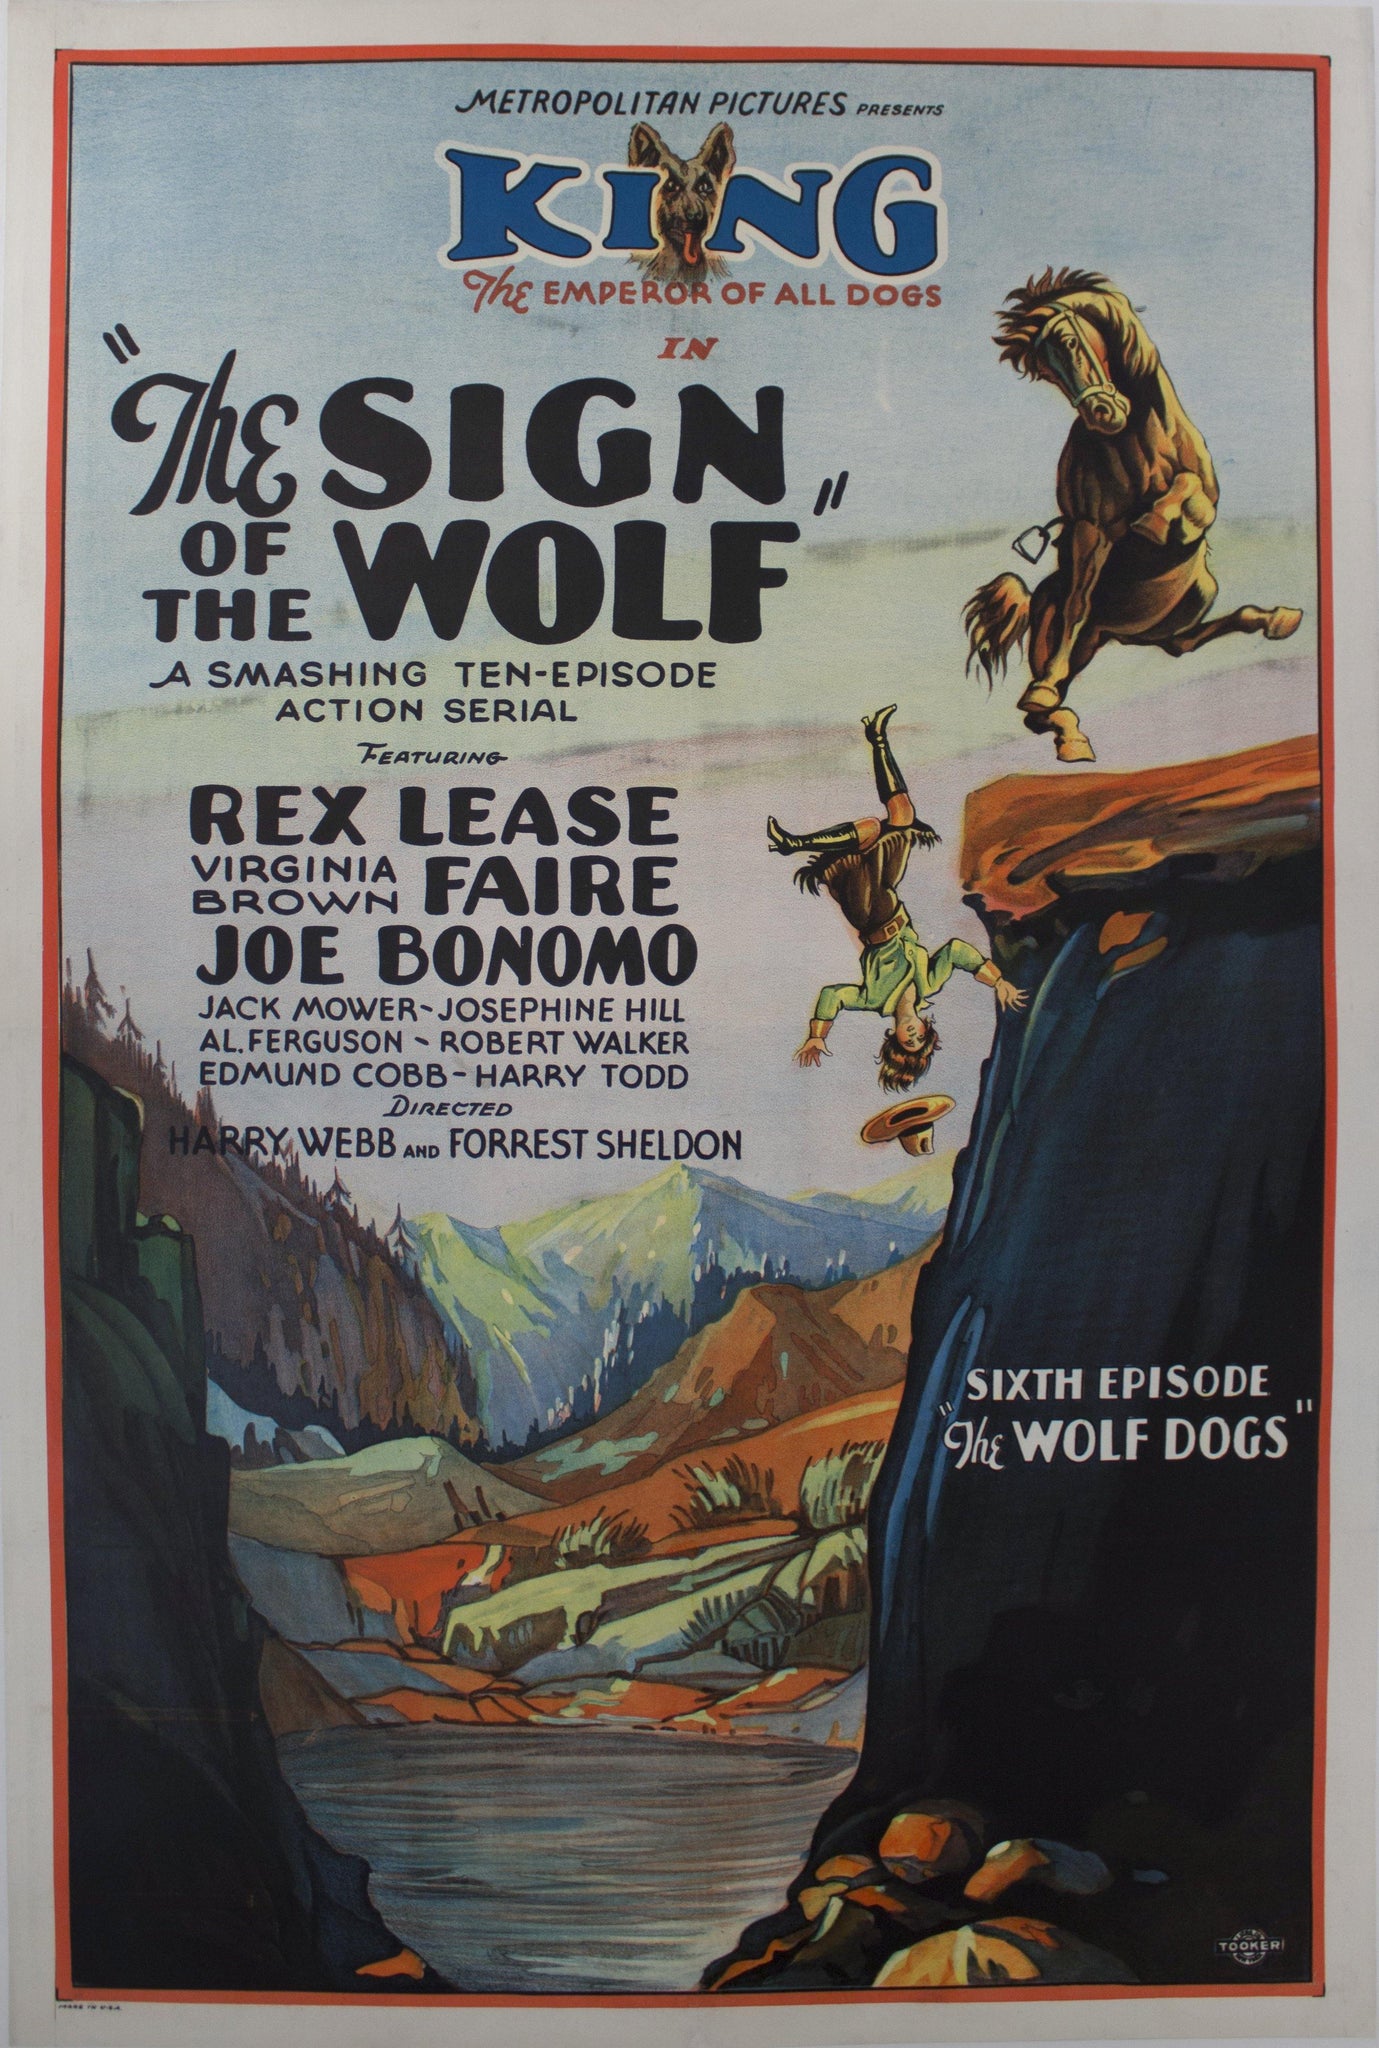 1931 The Sign of the Wolf - Sixth Episode "The Wolf Dogs" - Golden Age Posters